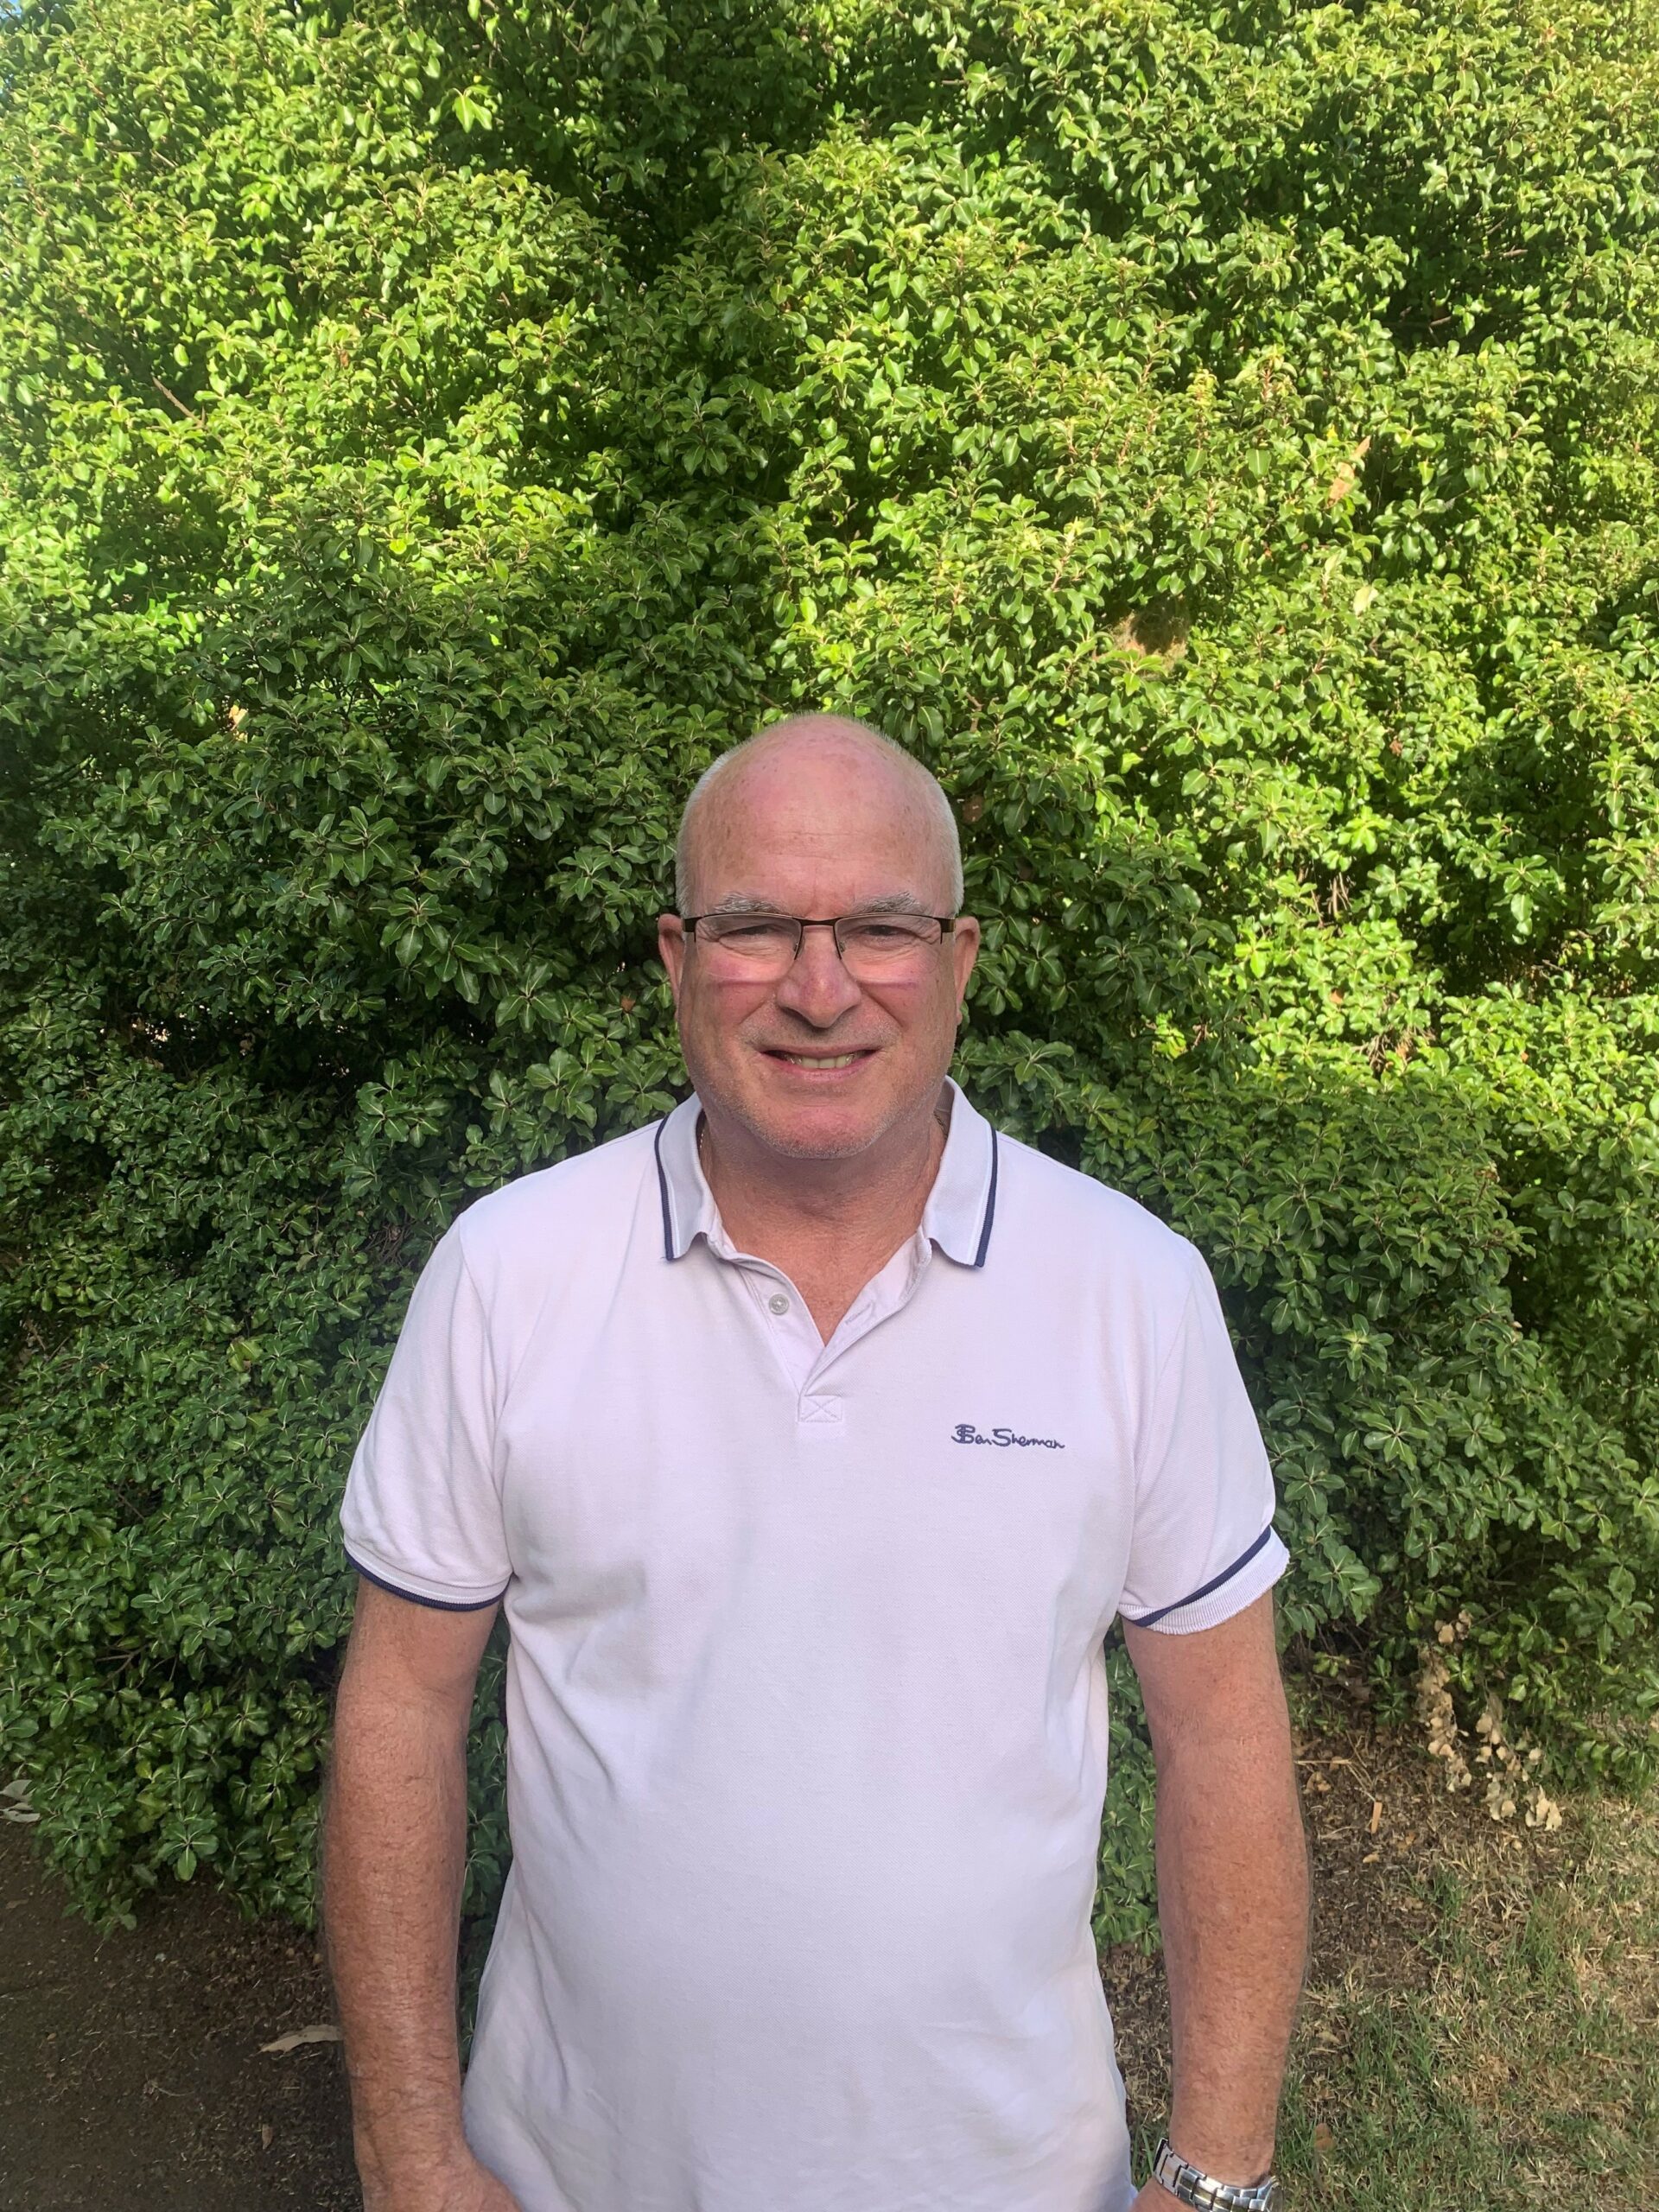 Greg is outside against a backdrop of green trees. he is smiling and wearing a white polo top and glasses